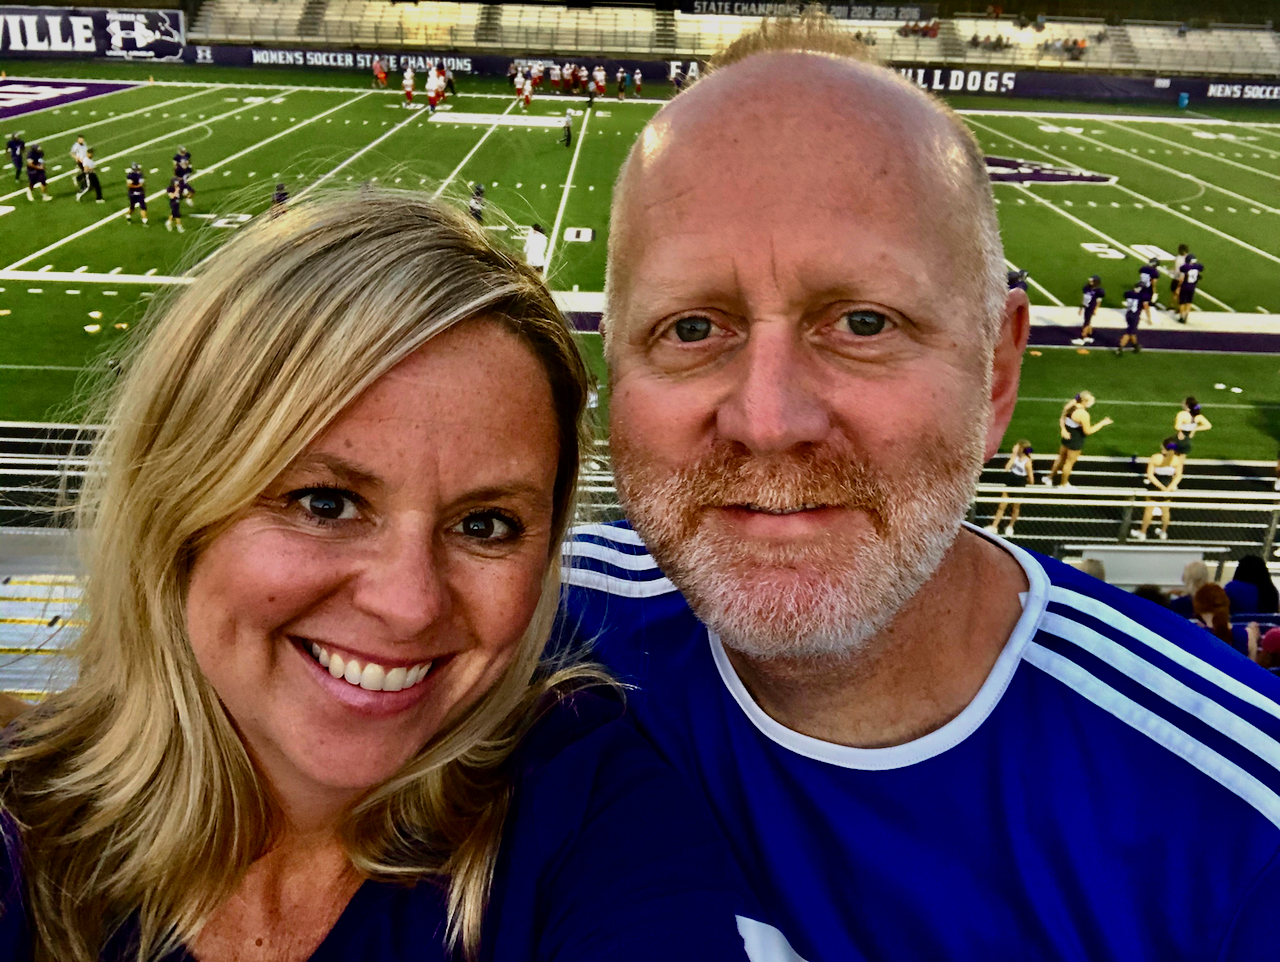 My favorite person and favorite view, at a Fayetteville HS football game.